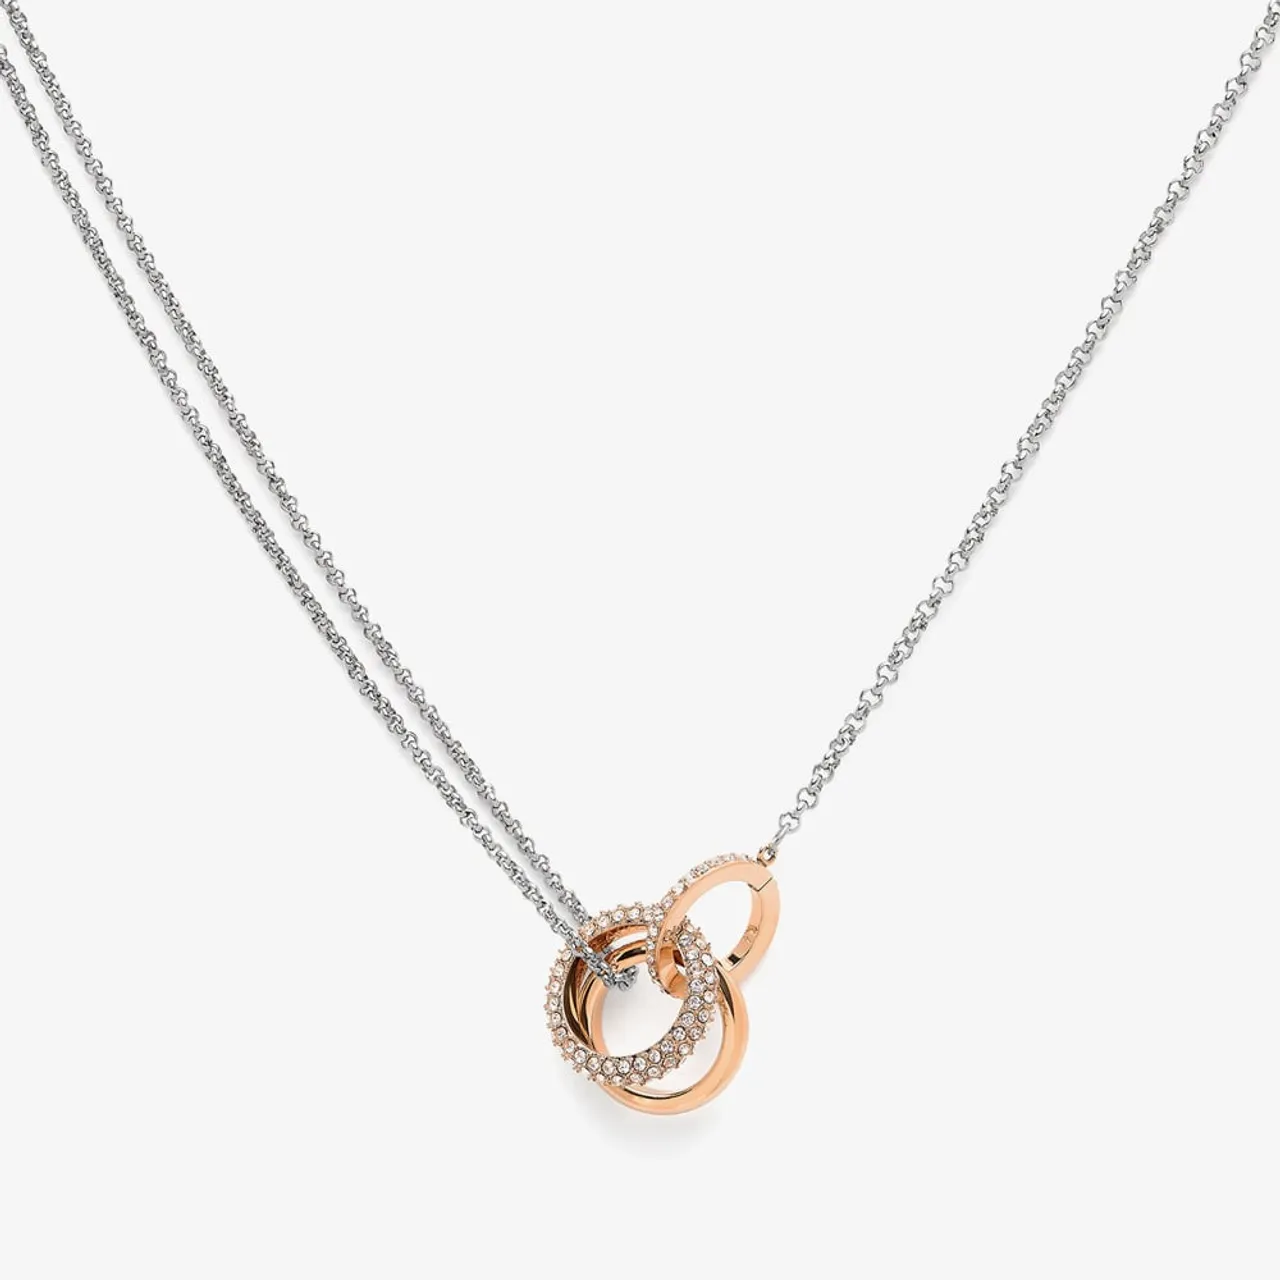 Olivia Burton Classic Entwine Stainless-Steel and Rose Gold Tone Necklace 24100003